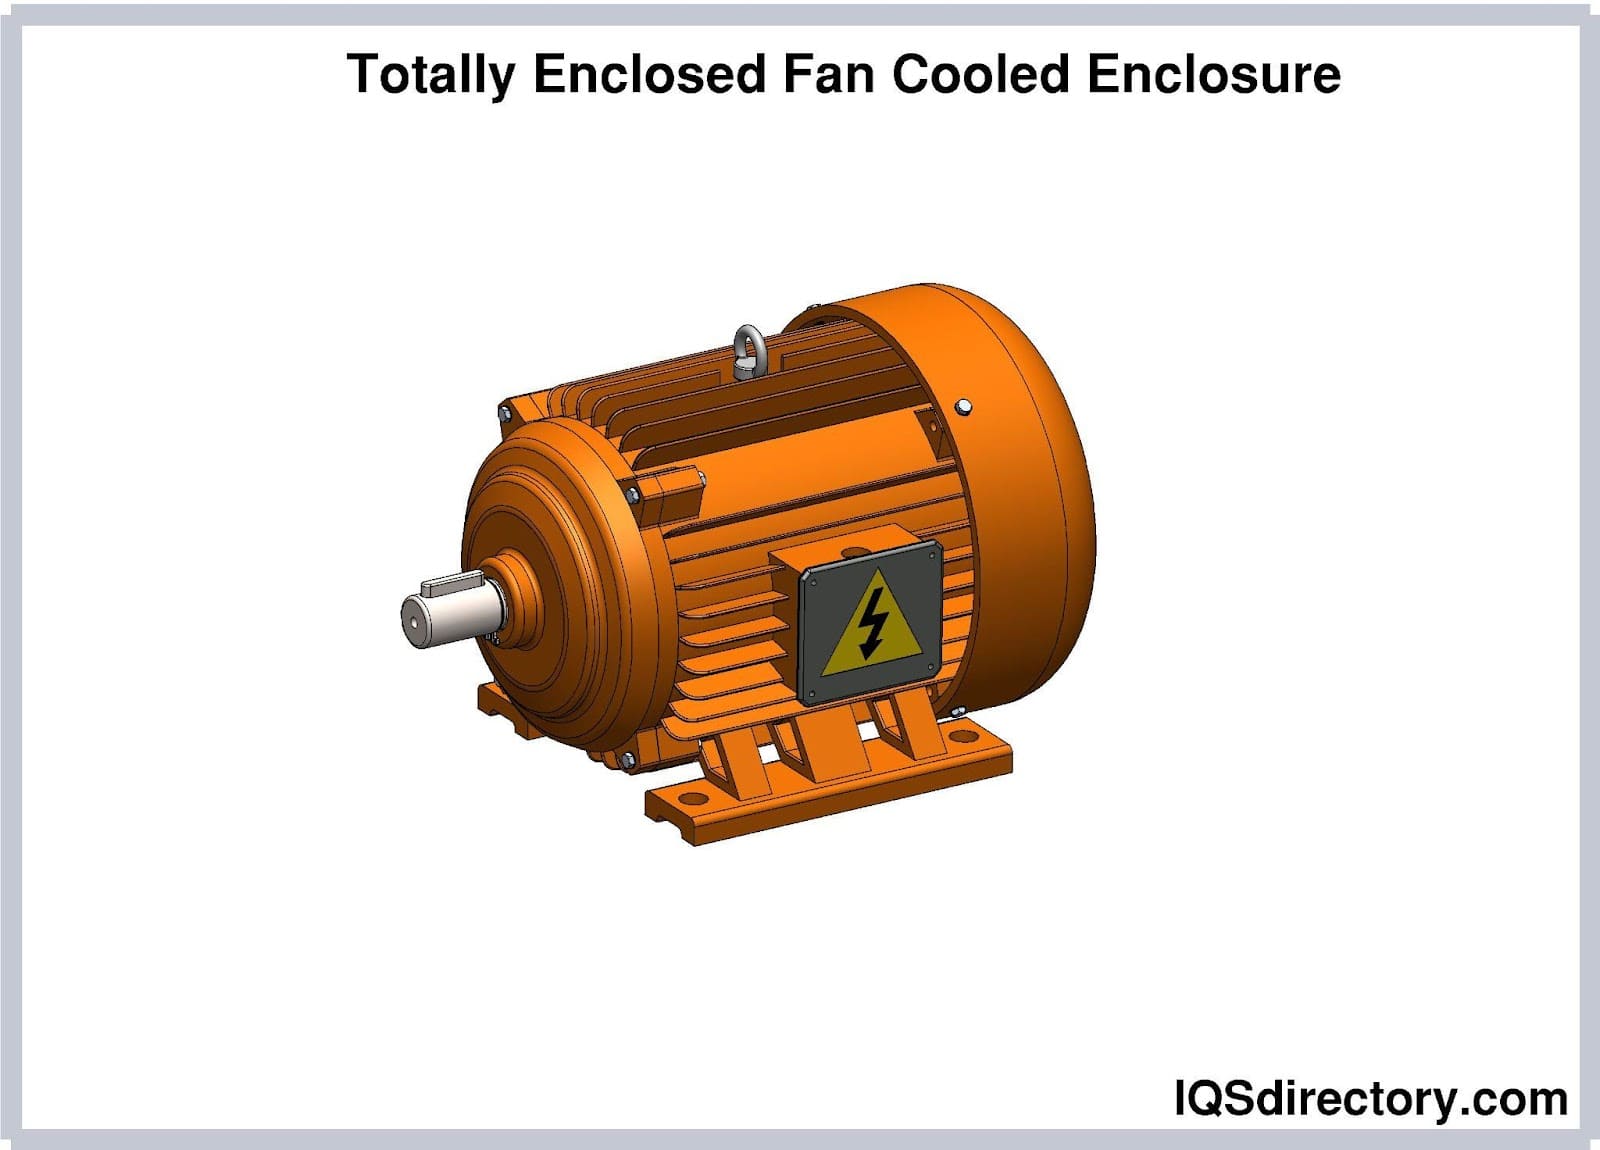 Totally Enclosed Fan Cooled Enclosure